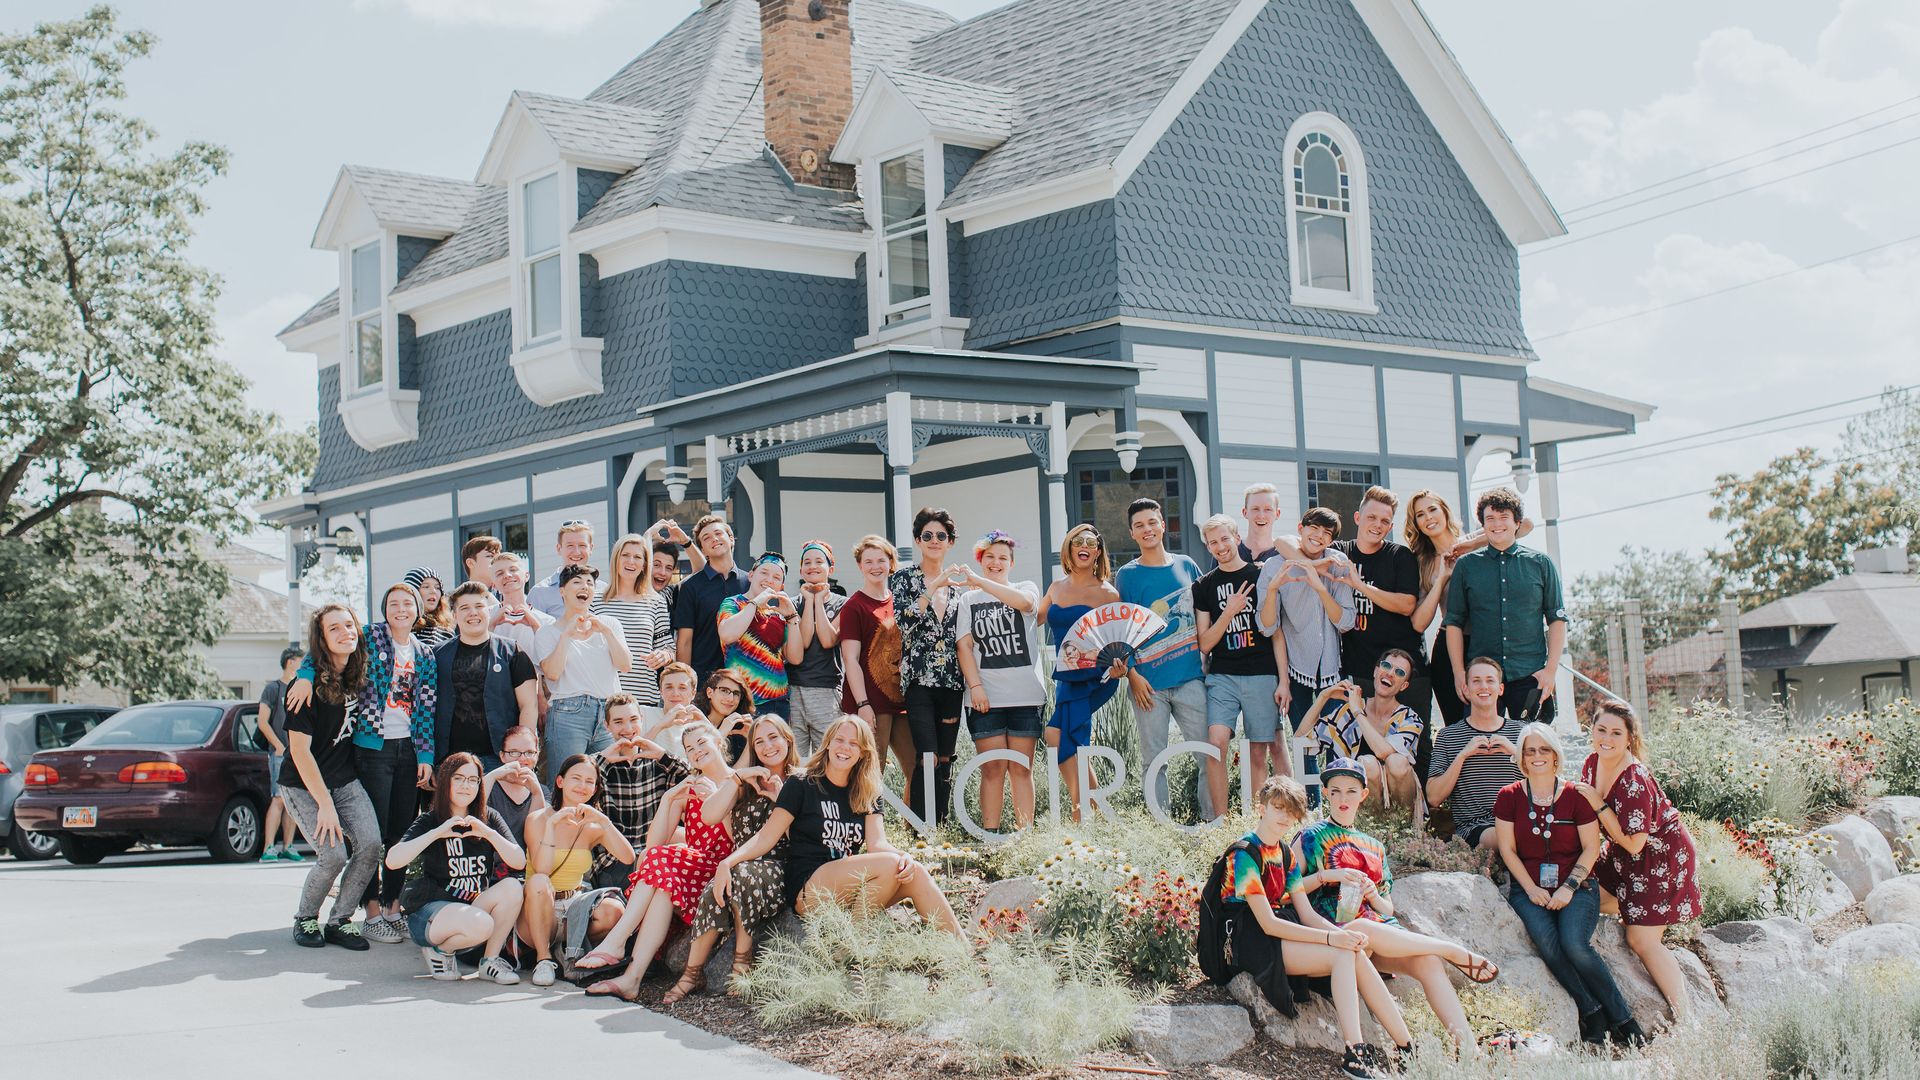 Youth in front fo the Encircle LGBTQ youth center in Provo, Utah. Photo: Encircle